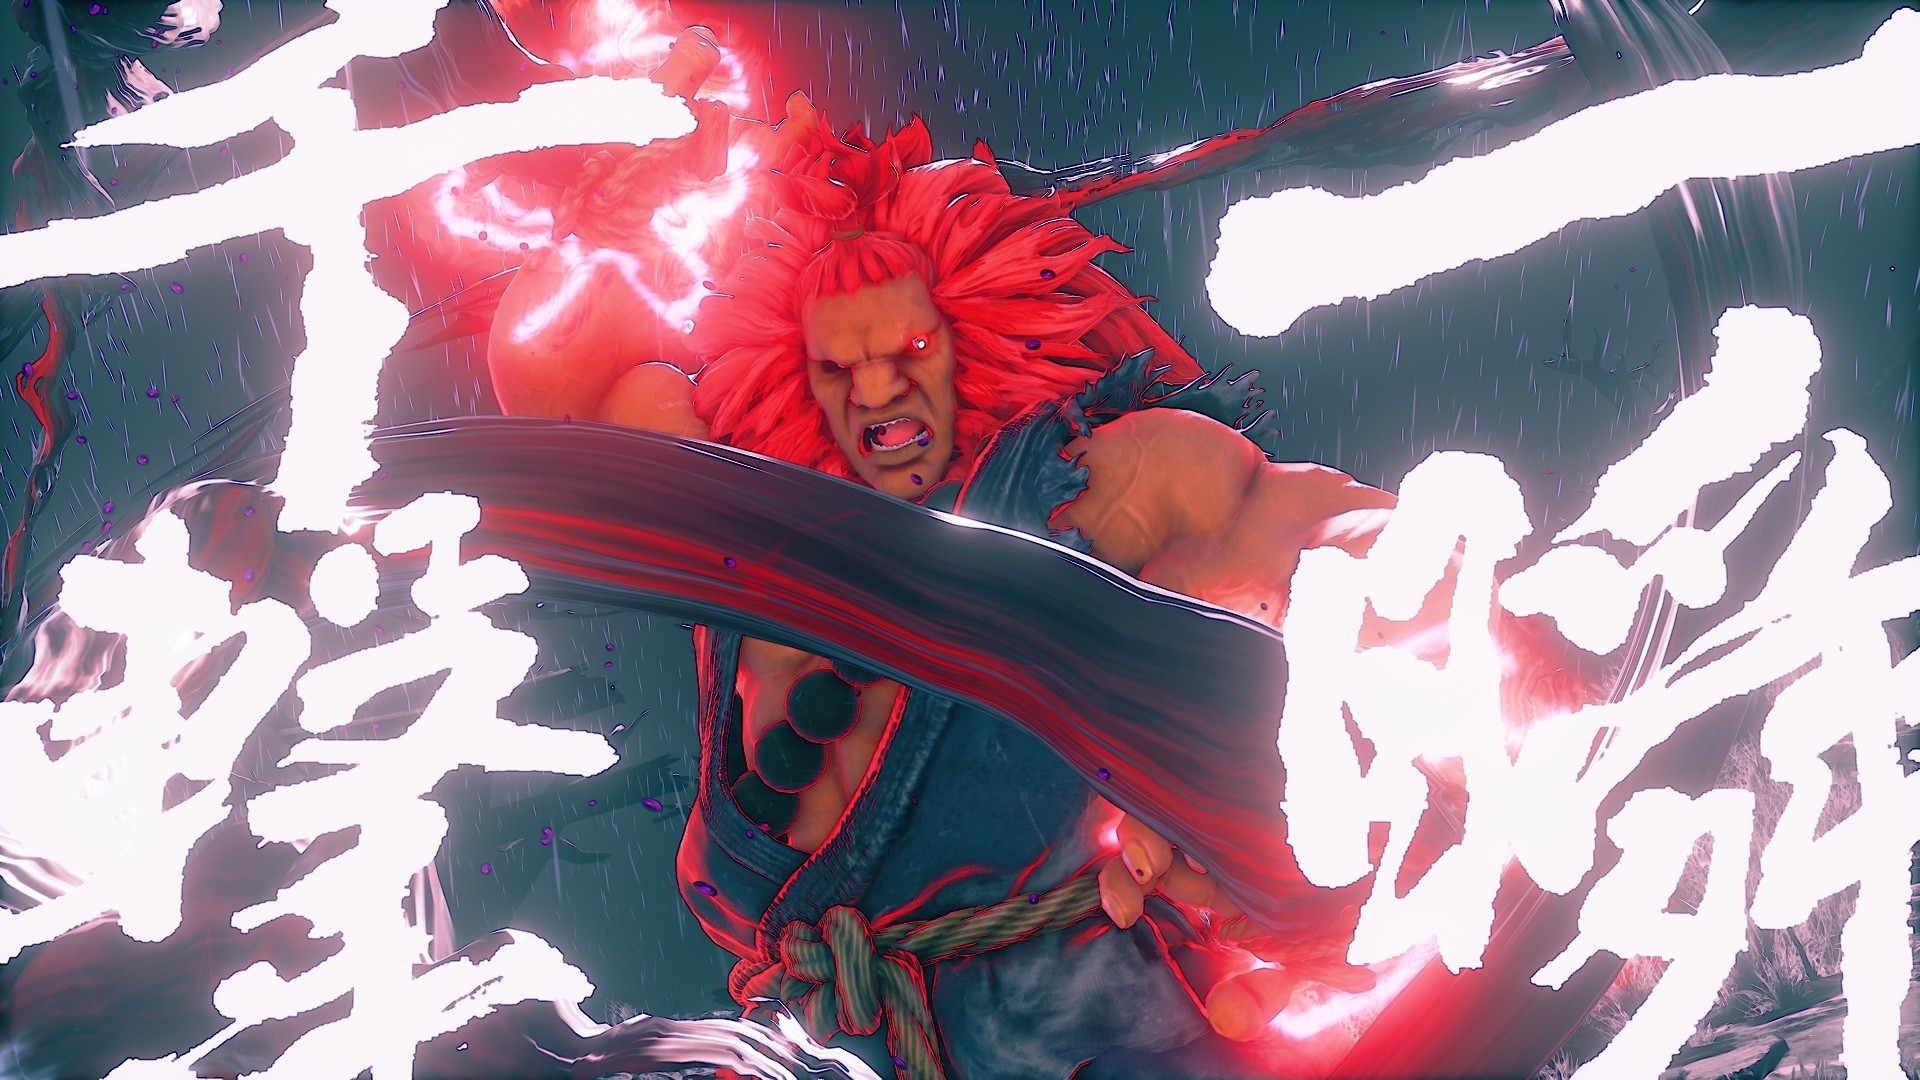 Major system changes coming to Street Fighter V